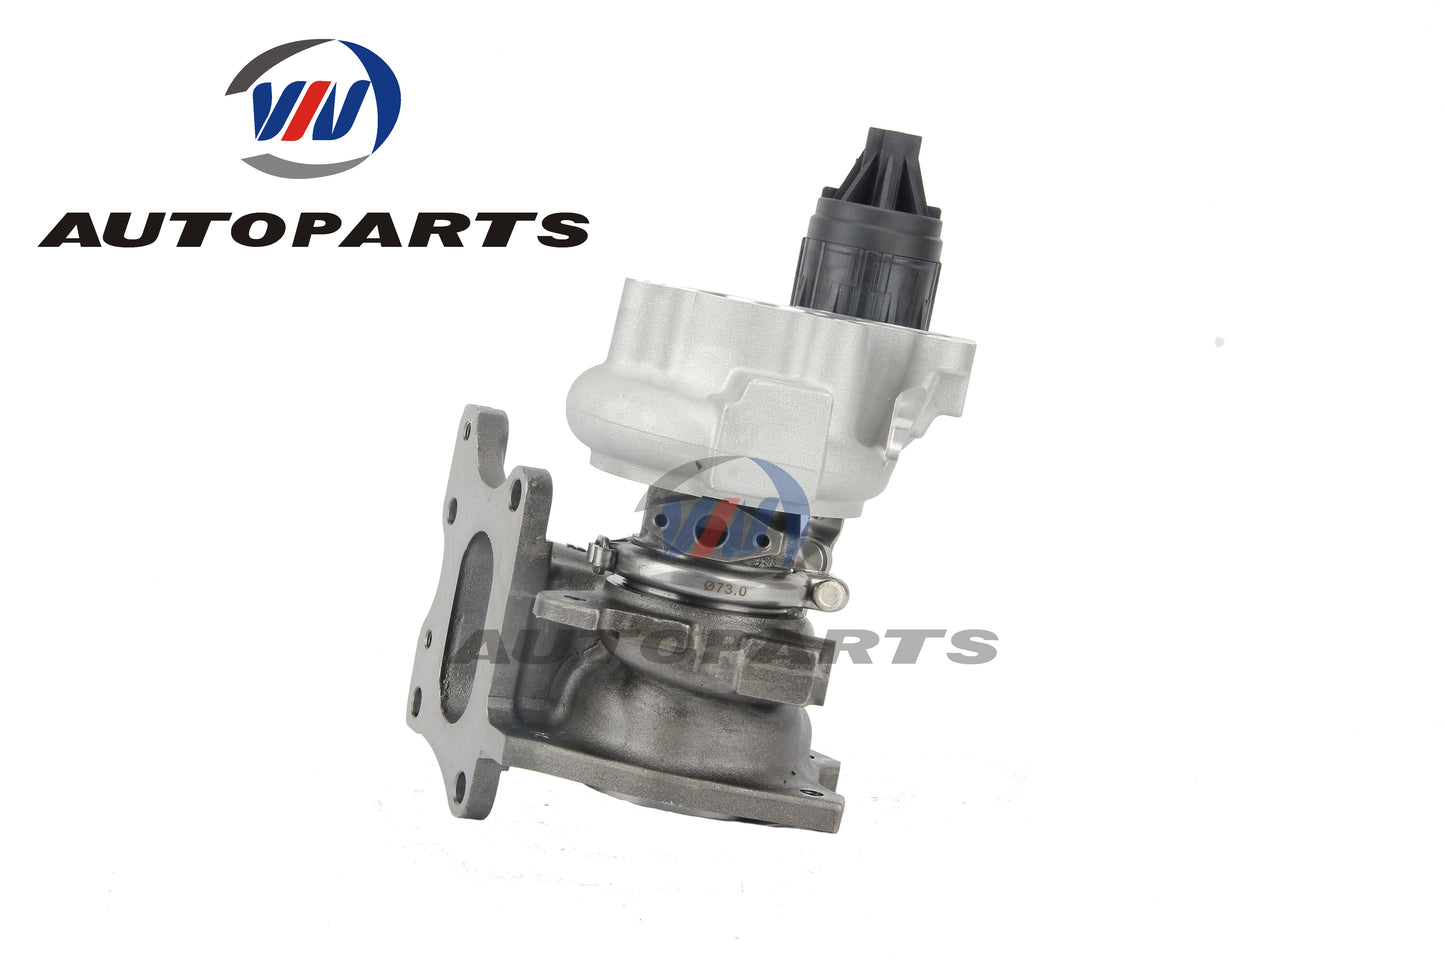 Upgraded TD04 Turbocharger for 2015+ 10th Gen Civic Si 1.5 T L15B7 up to 350+horse power